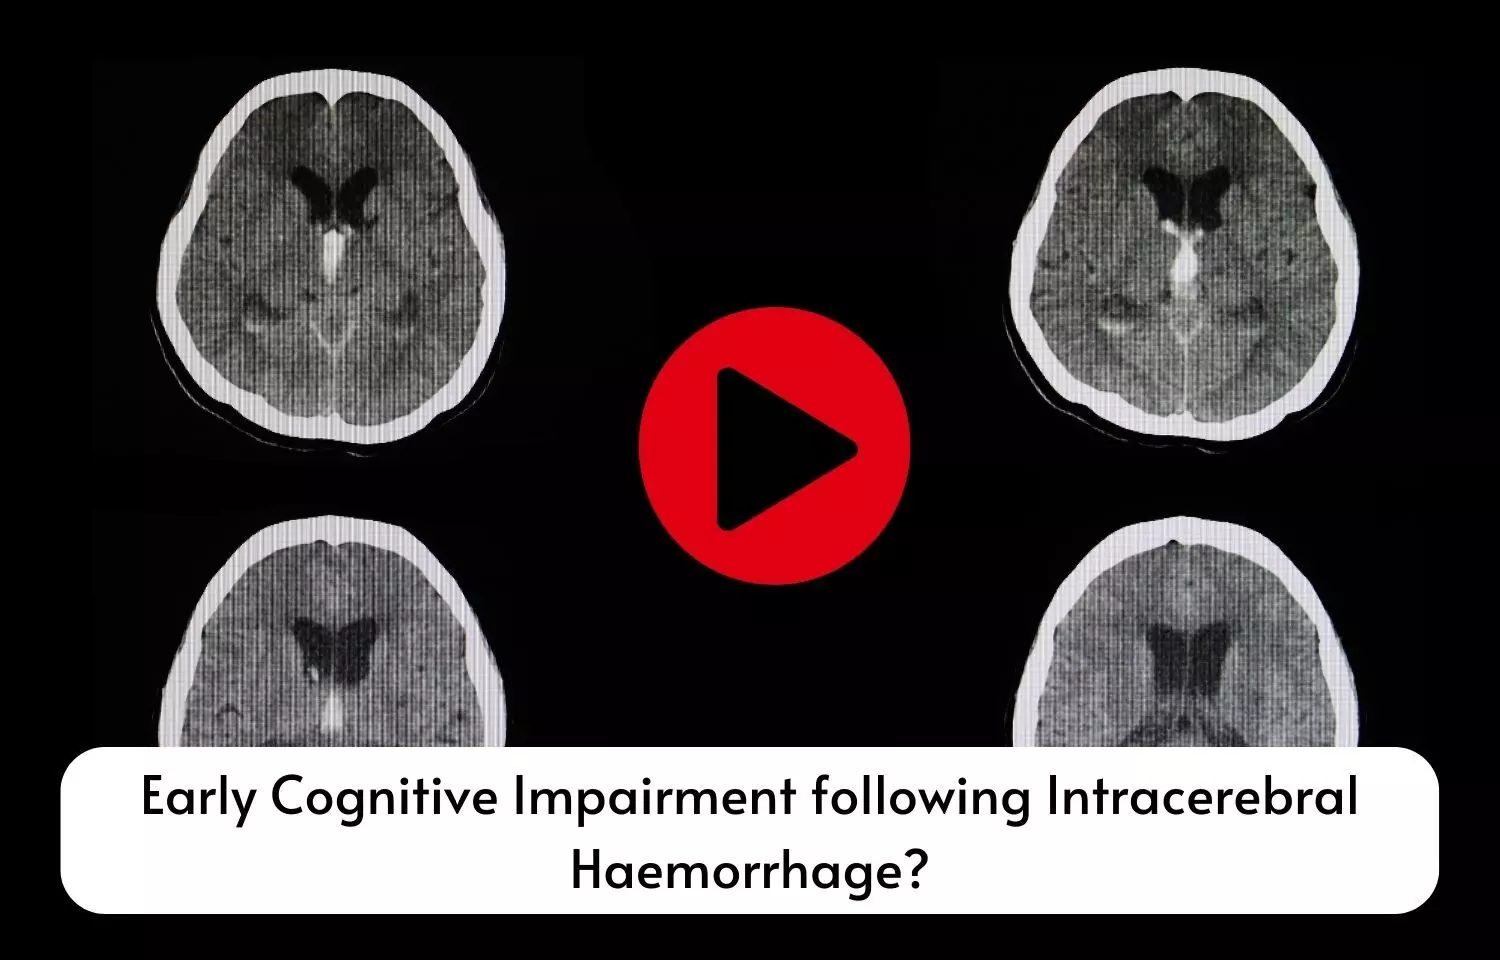 Early Cognitive Impairment following Intracerebral Haemorrhage?